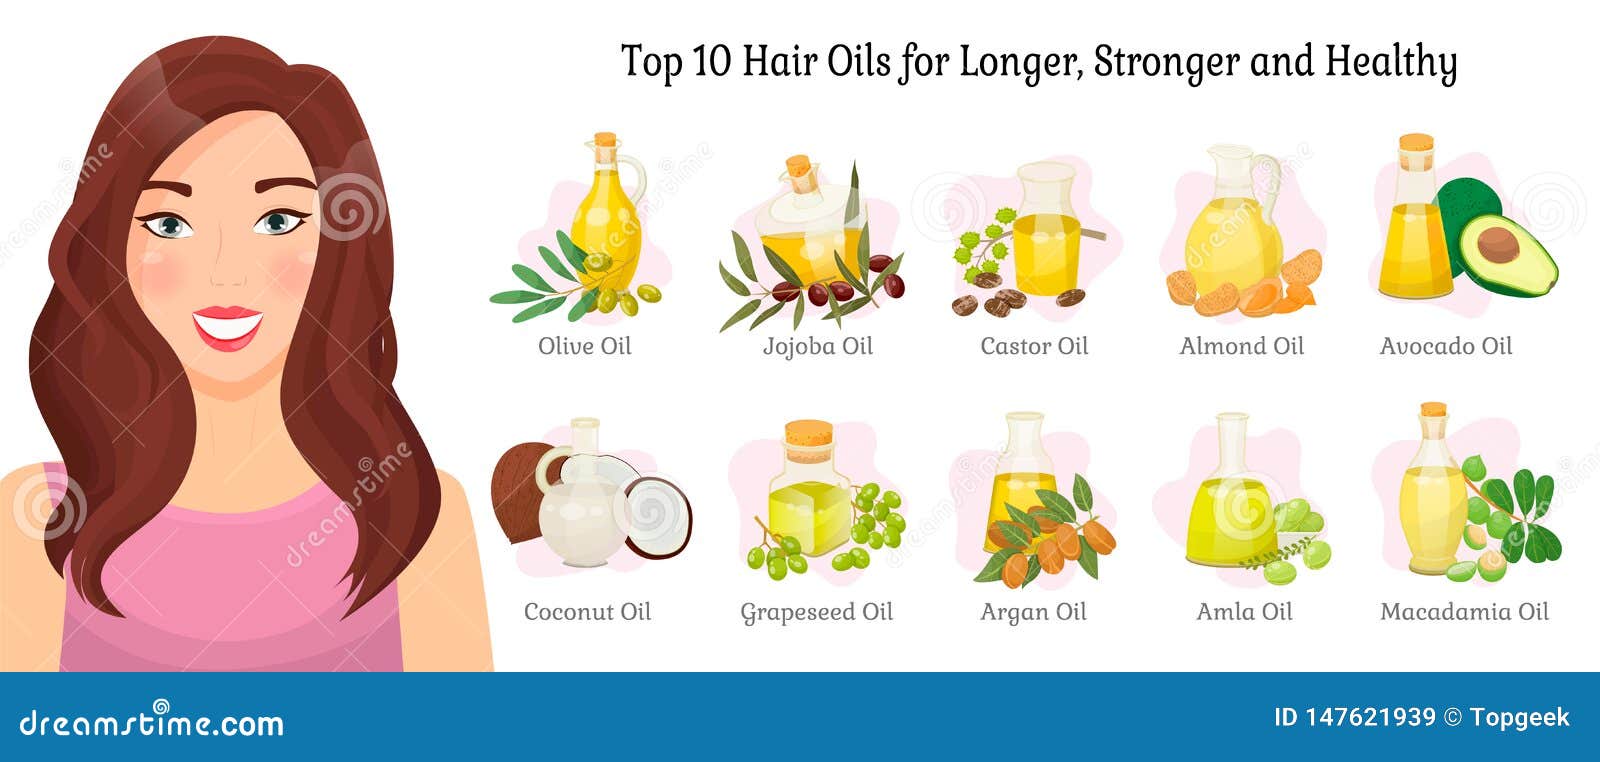 Top 10 Hair Oils Advert Vector Woman and Fruits Stock Vector - Illustration  of attractive, character: 147621939